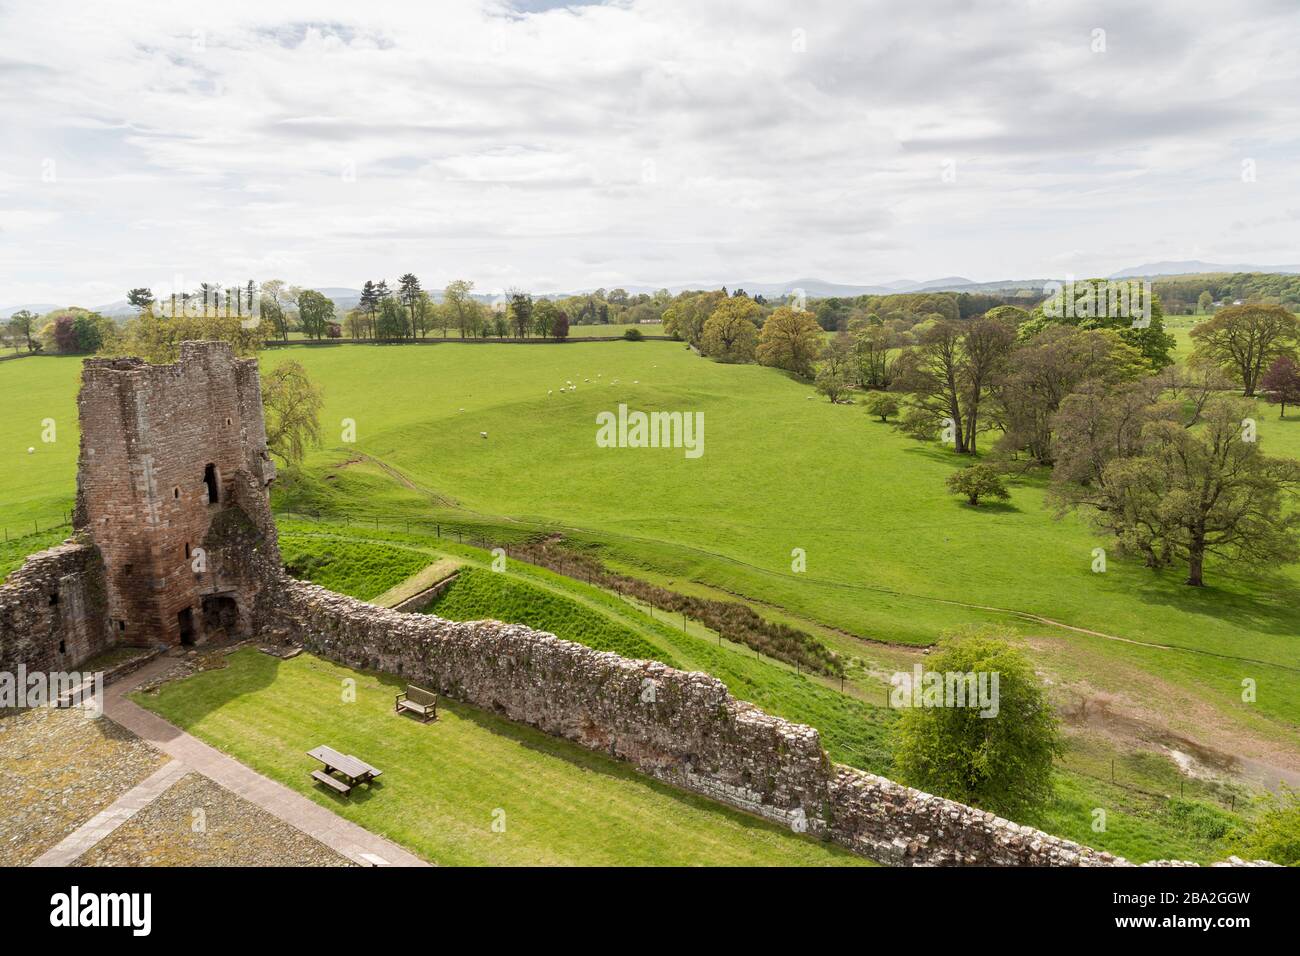 The Tower of League built c. 1300 and countryside beyond, Brougham Castle ruin, Cumbria, England, UK Stock Photo